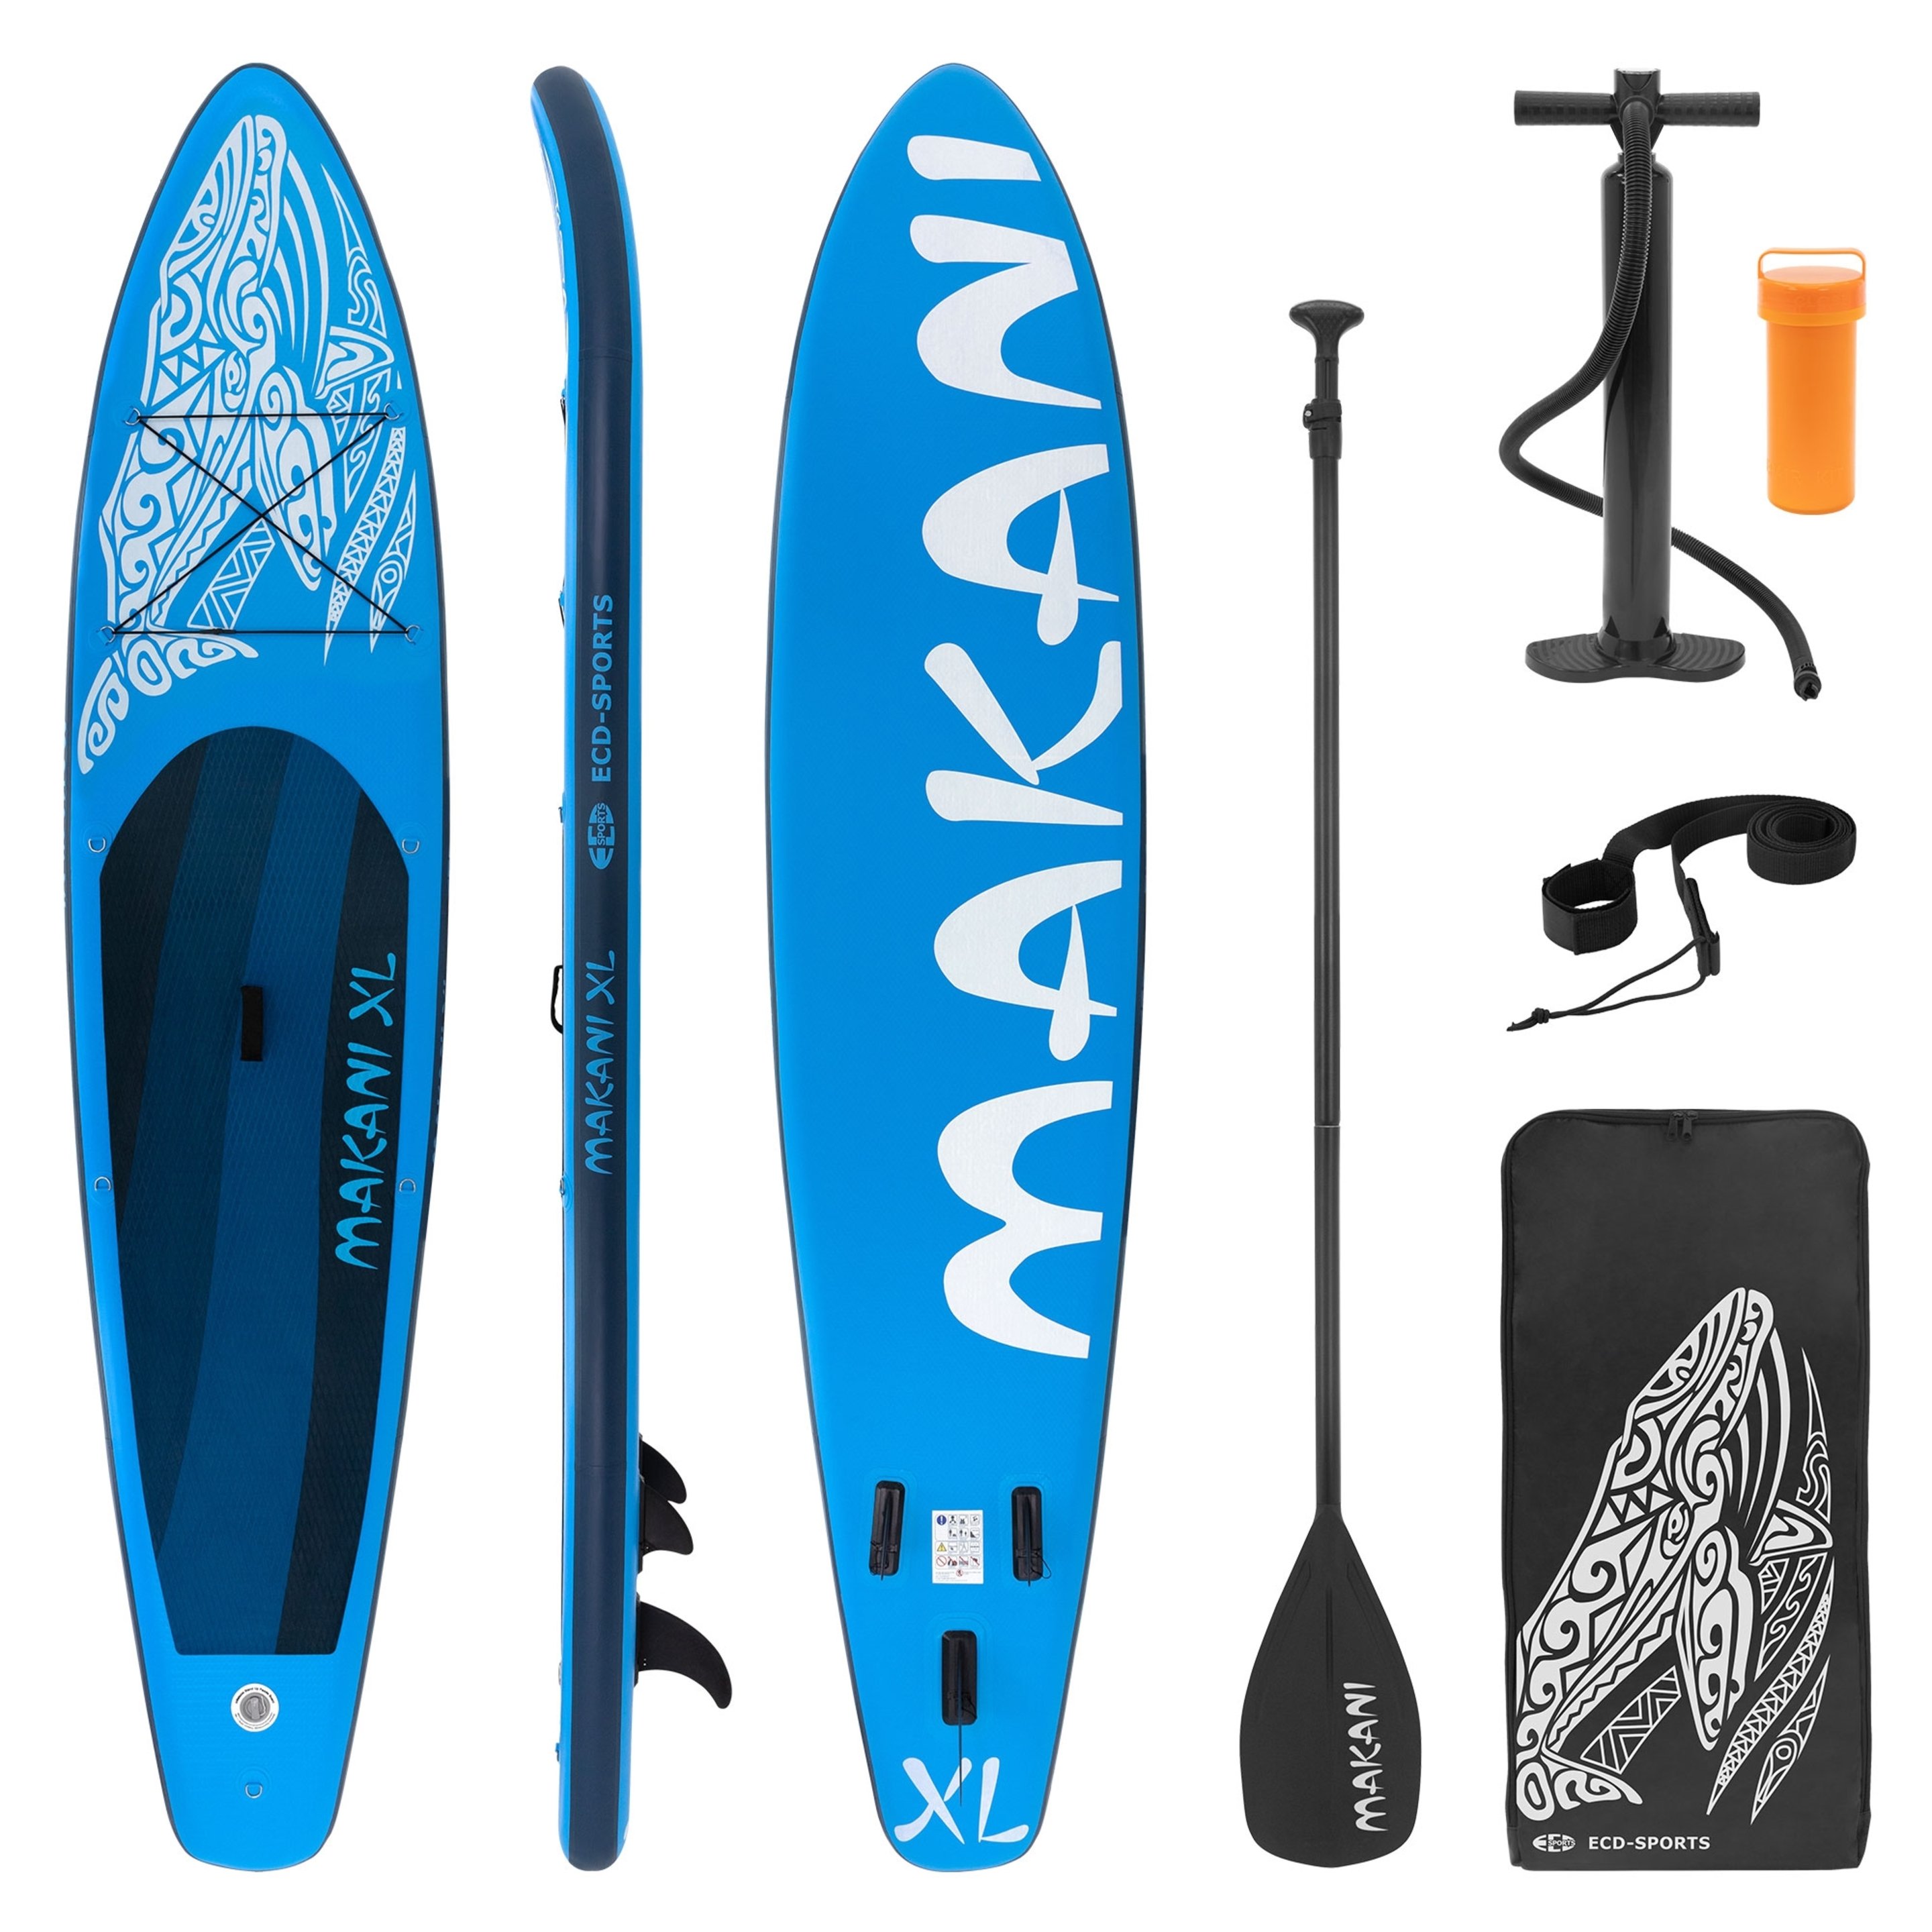 Tabla De Stand Up Paddle Inflable Makani Xl 380x80x15 Cm - azul-mate - 